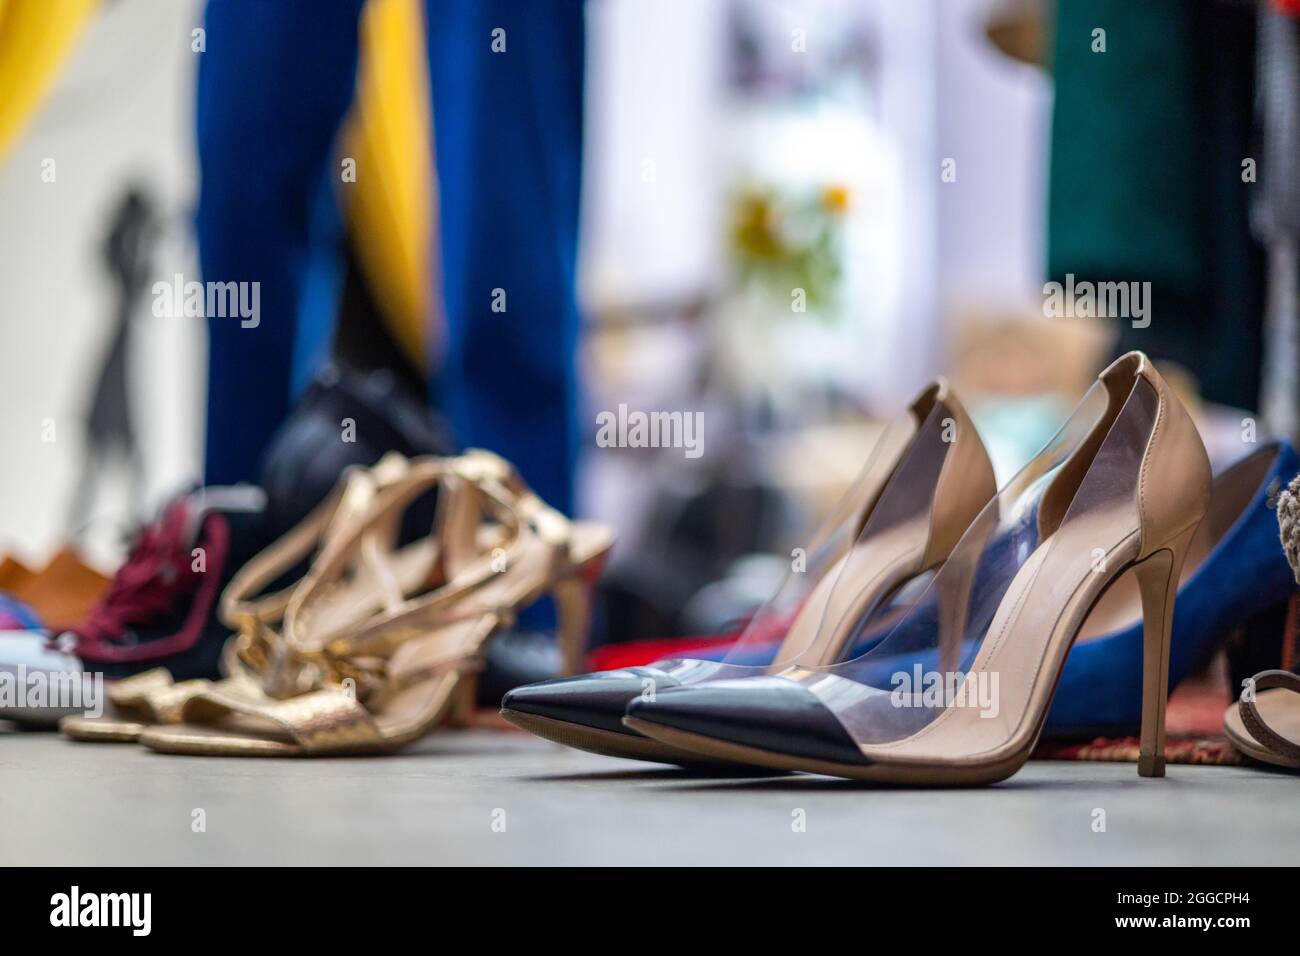 Modern clothes rack full of fashionable apparel and shoes closeup clothing and accessories storage Stock Photo